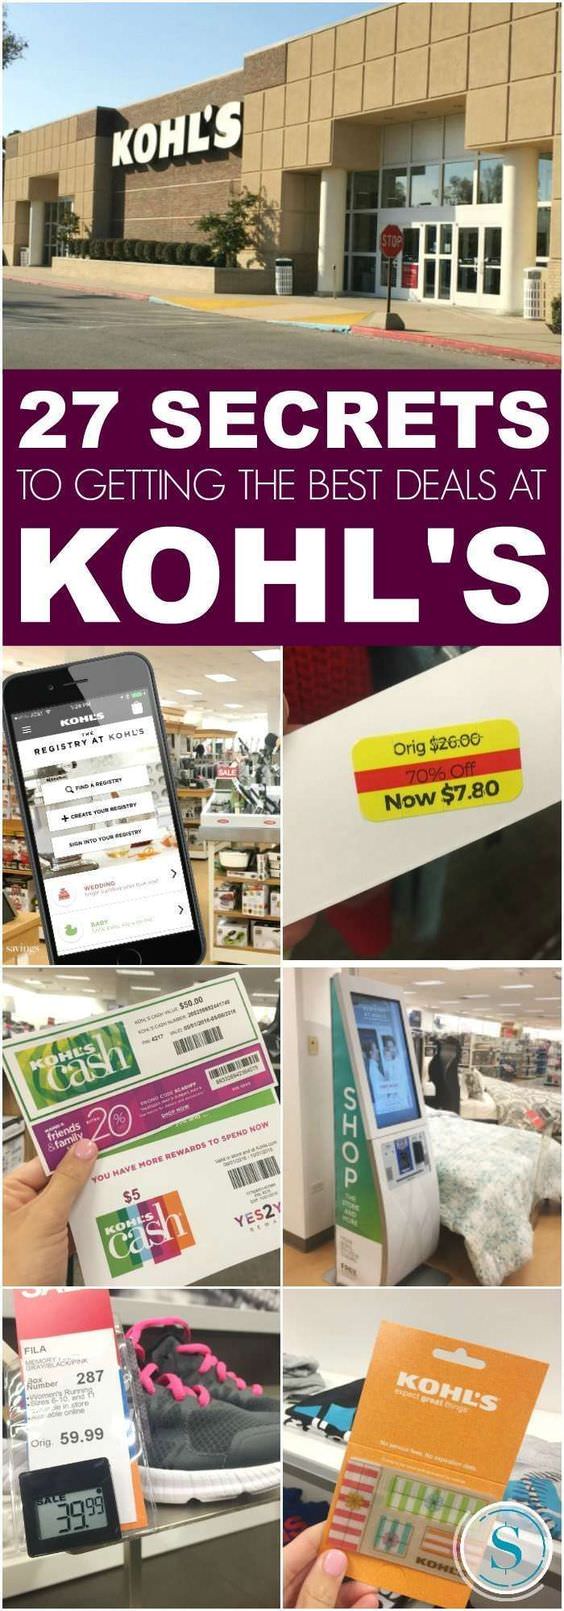 We have rounded up our Best 27 Secrets to Shopping at Kohl’s & Saving Money to help you get the best bang for your buck!